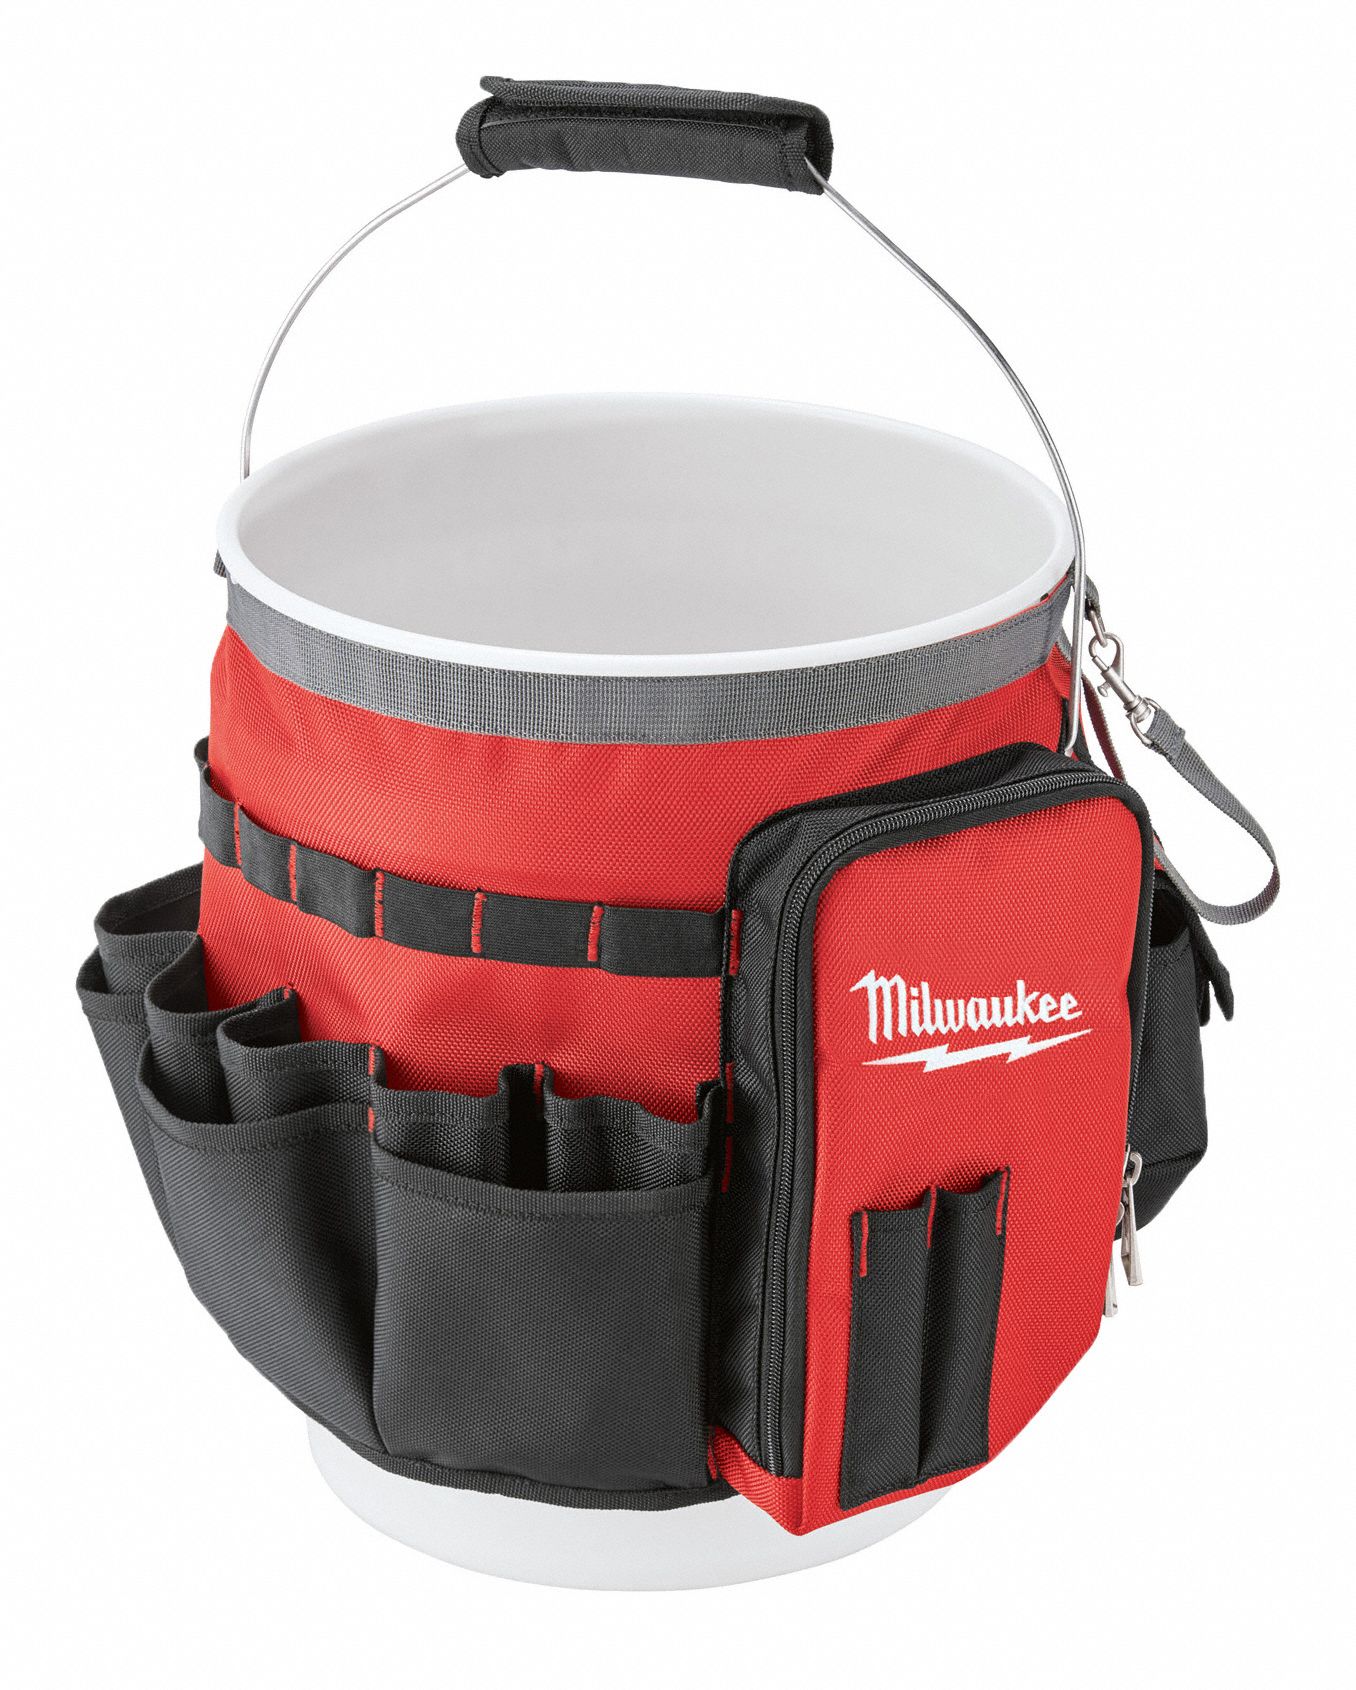 Bucket Tool Organizer: Red, 34 Pockets, 10 in Overall Dia, 13 3/8 in Overall Ht